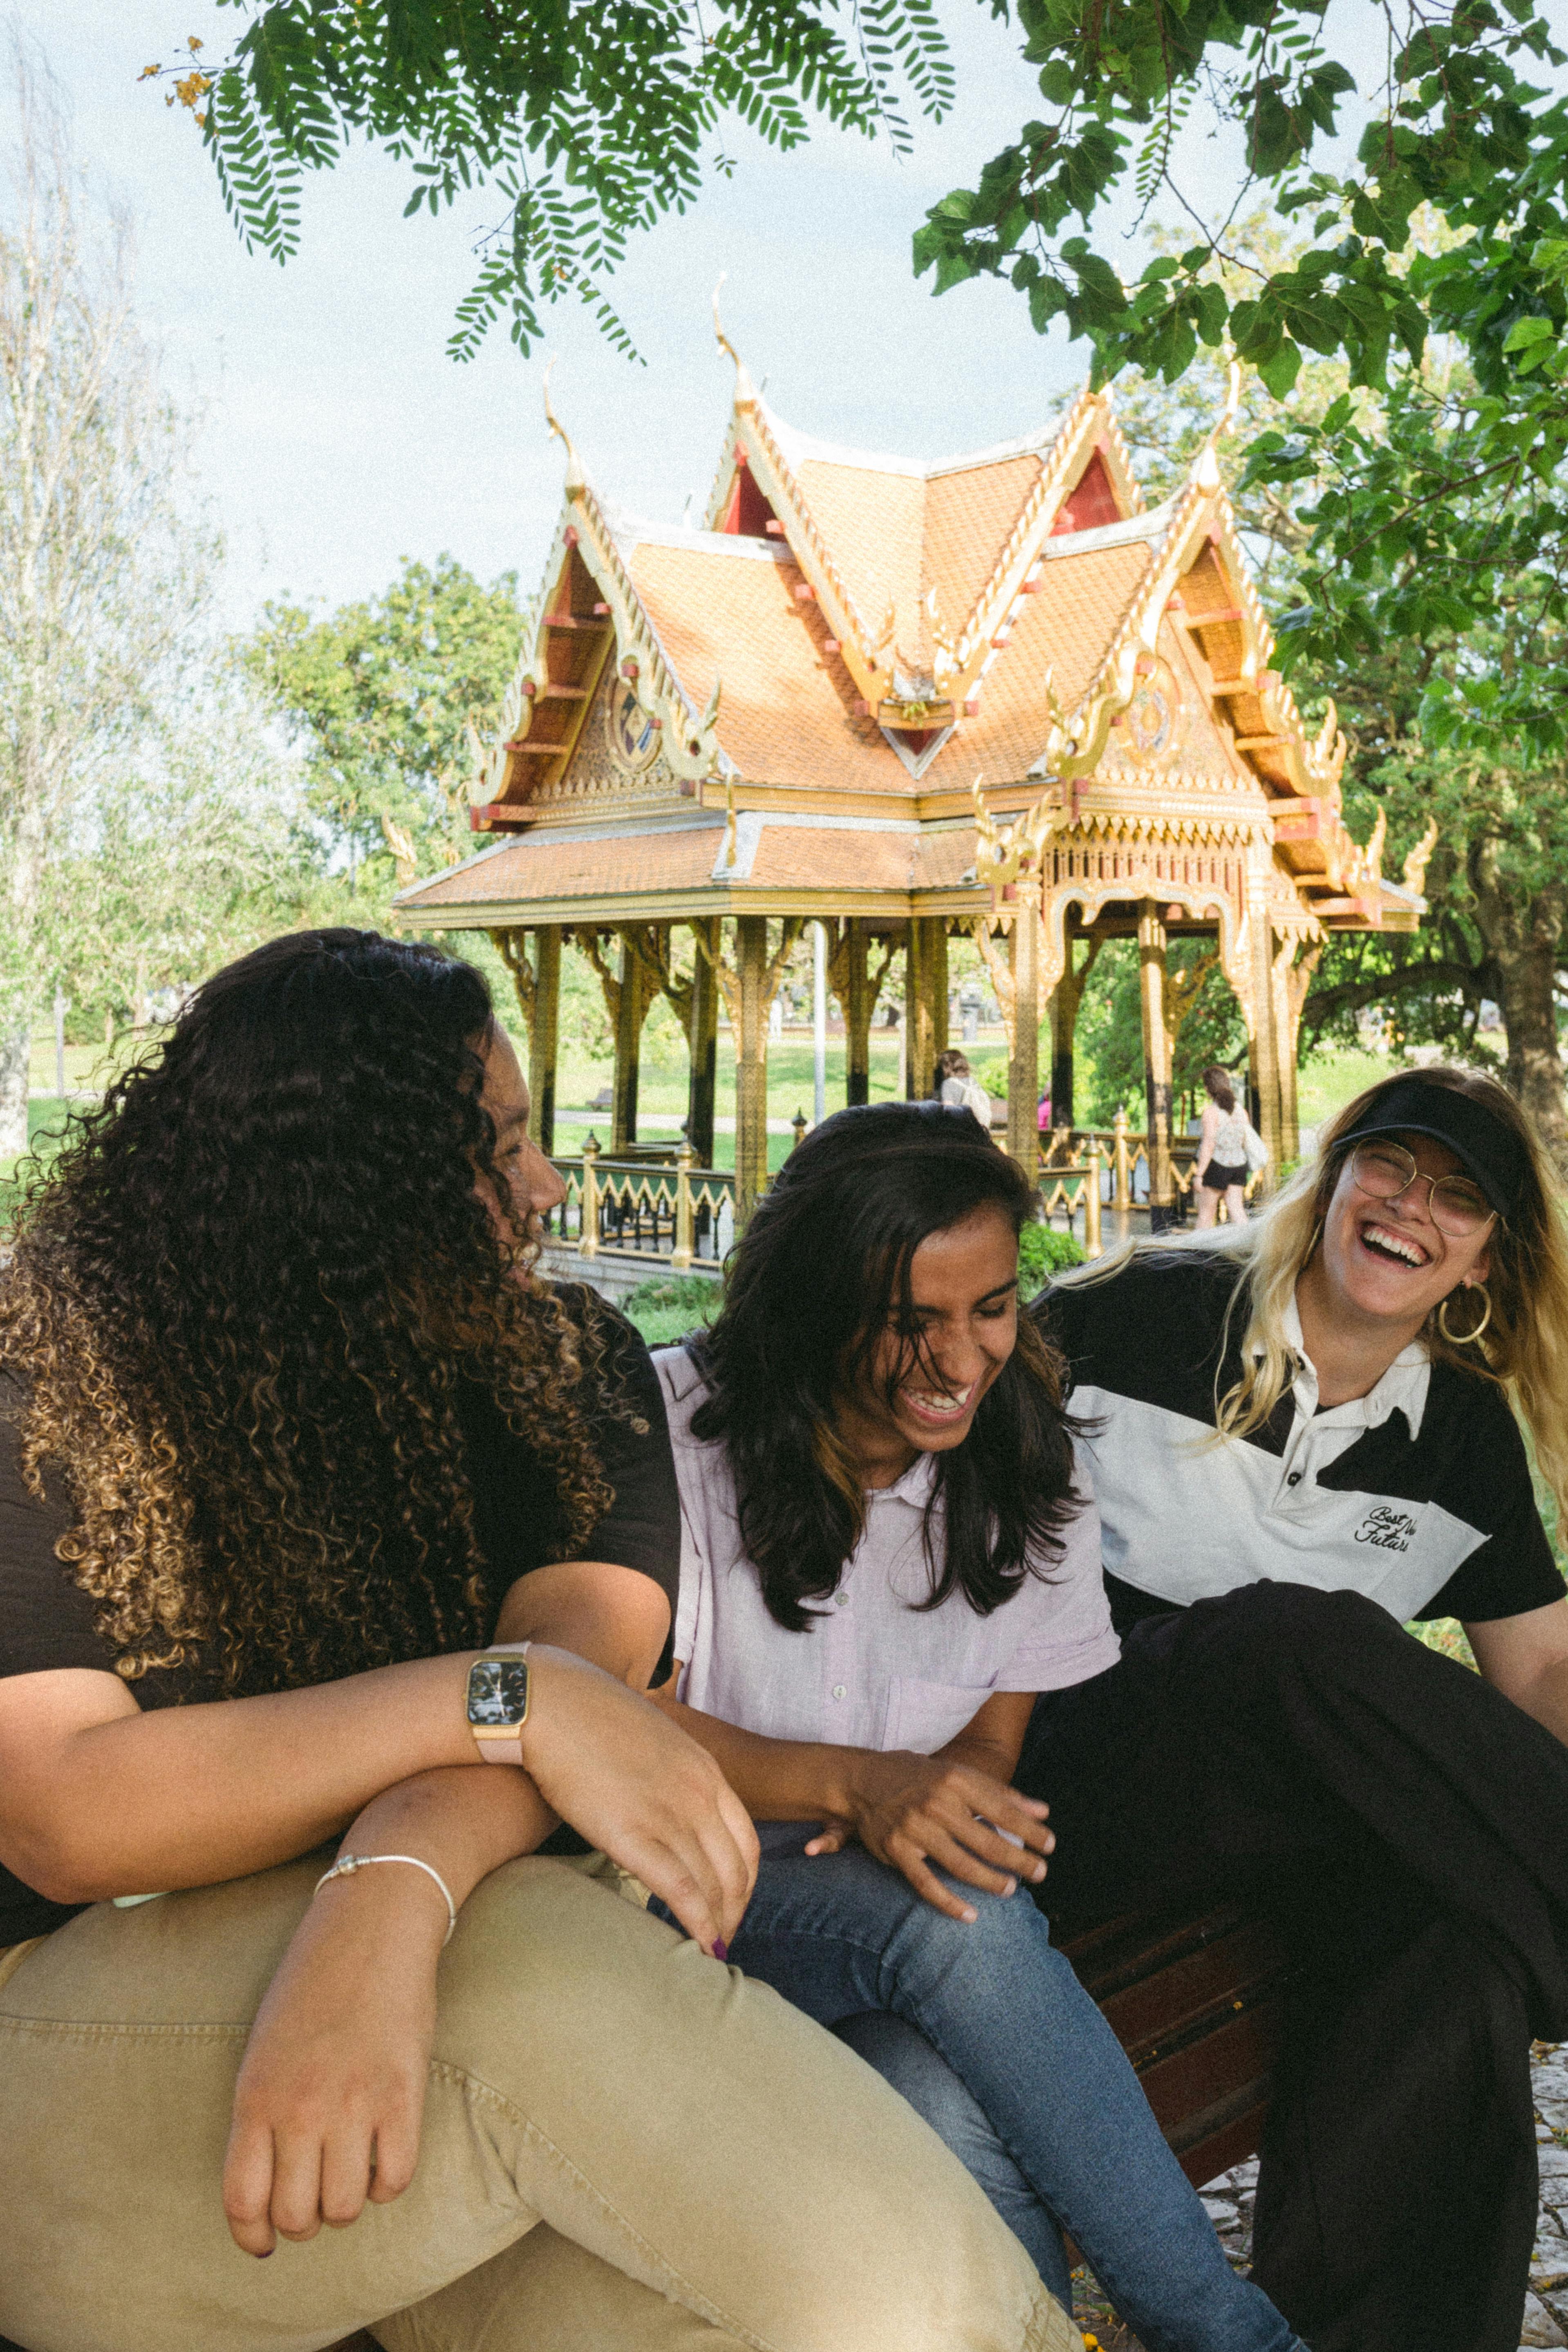 A woman laughing with her friends | Source: Pexels